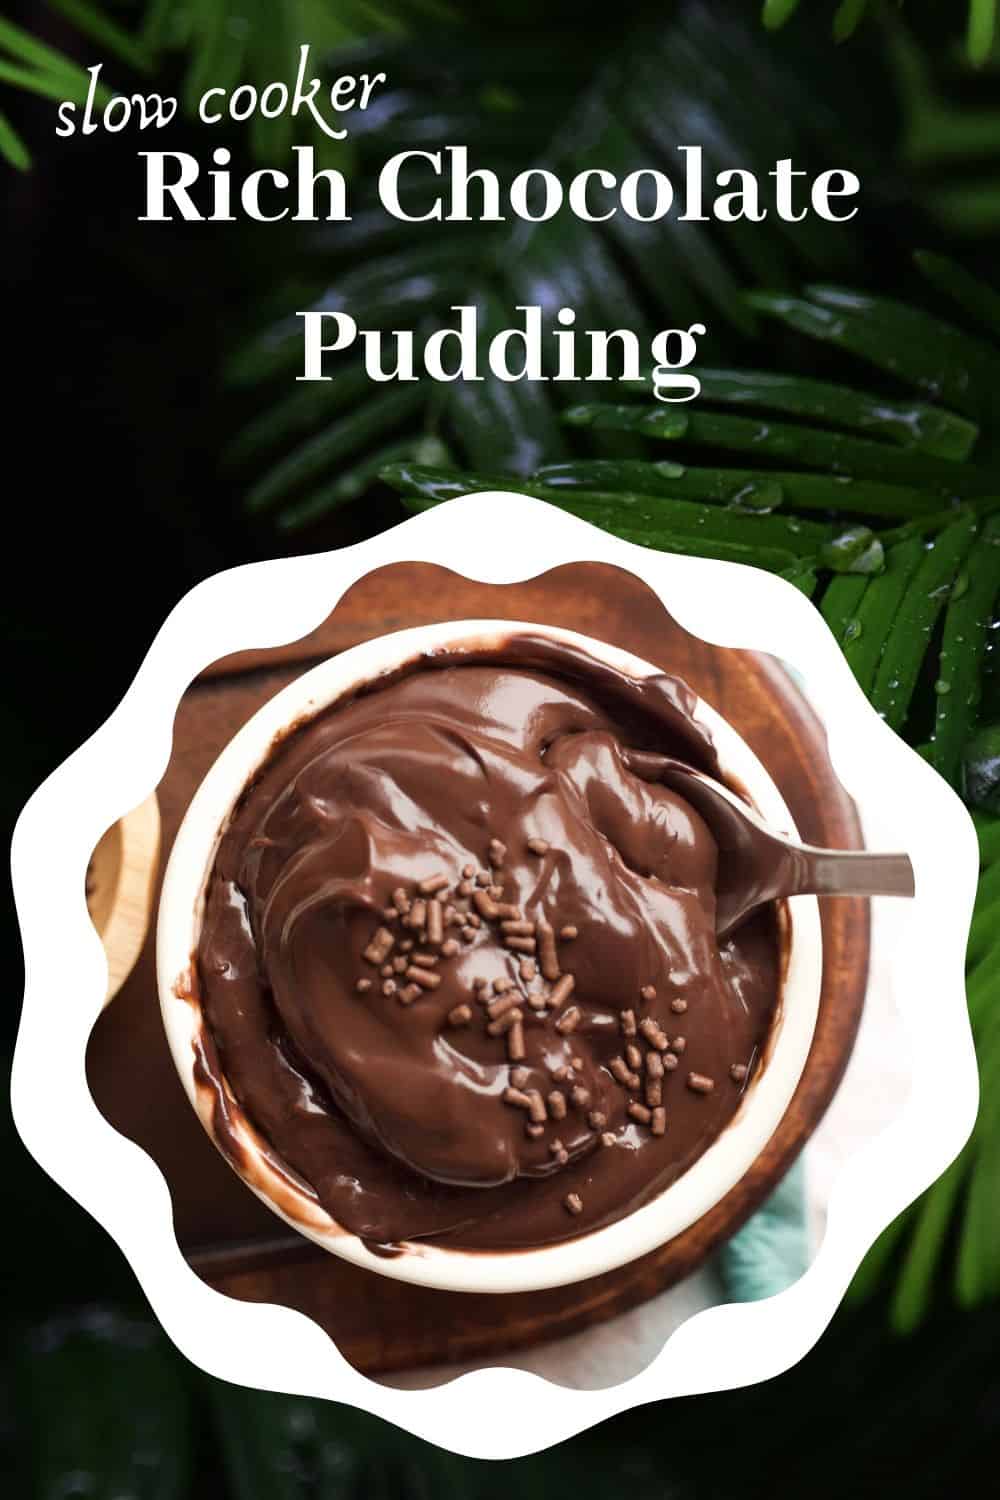 Slow Cooker Rich Chocolate Pudding